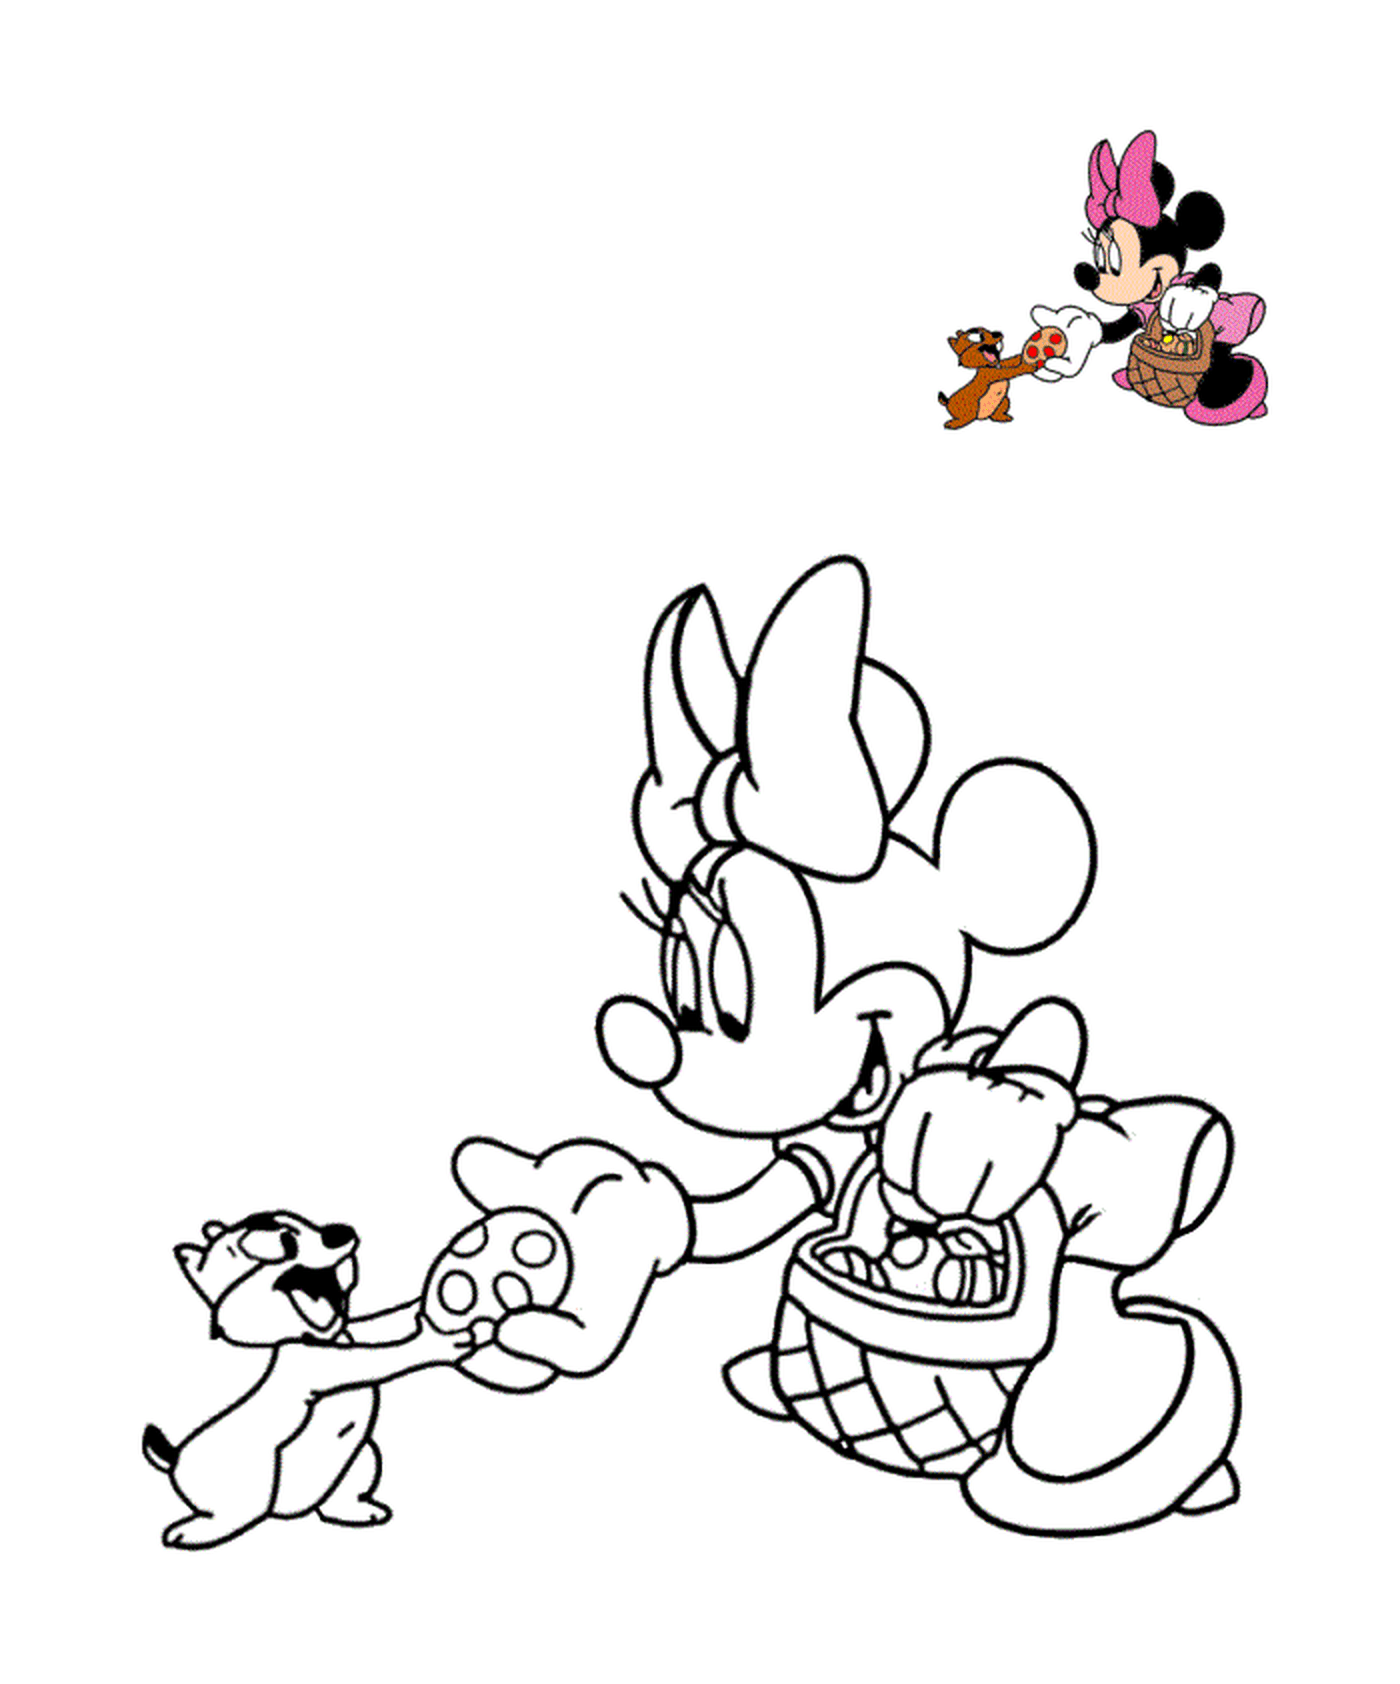  Minnie friends ships mouse 